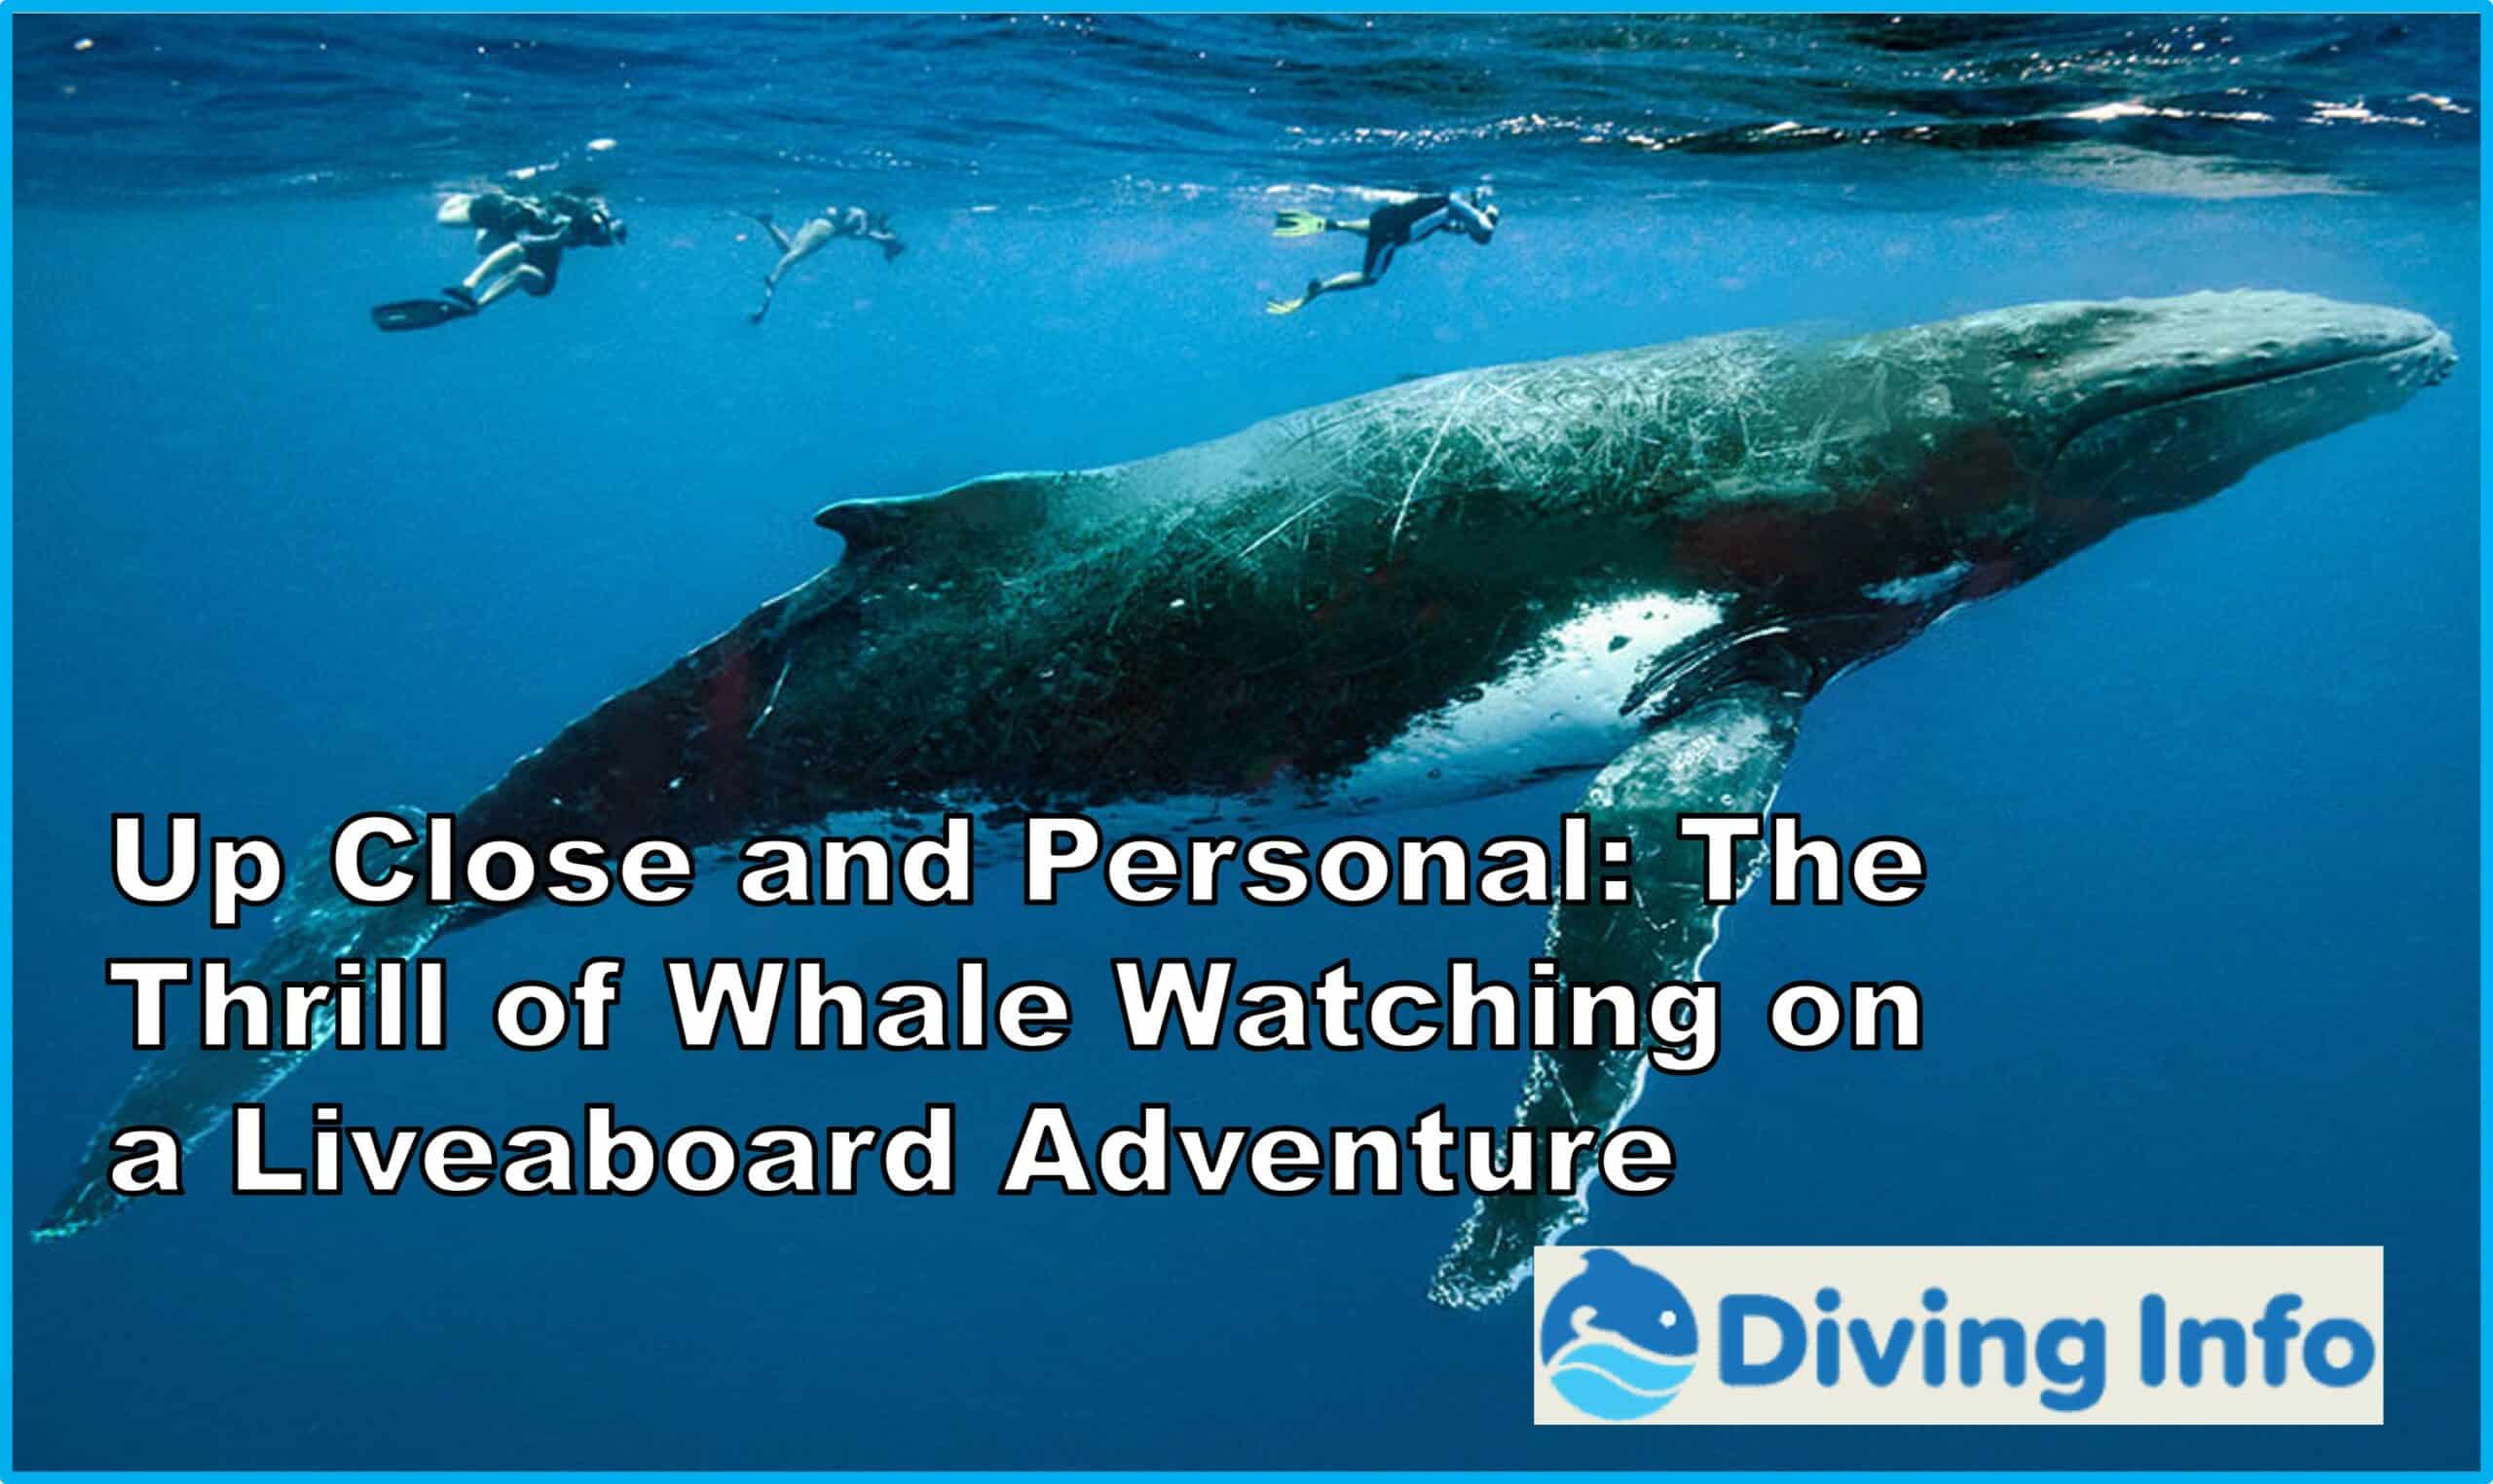 Up Close and Personal The Thrill of Whale Watching on a Liveaboard Adventure